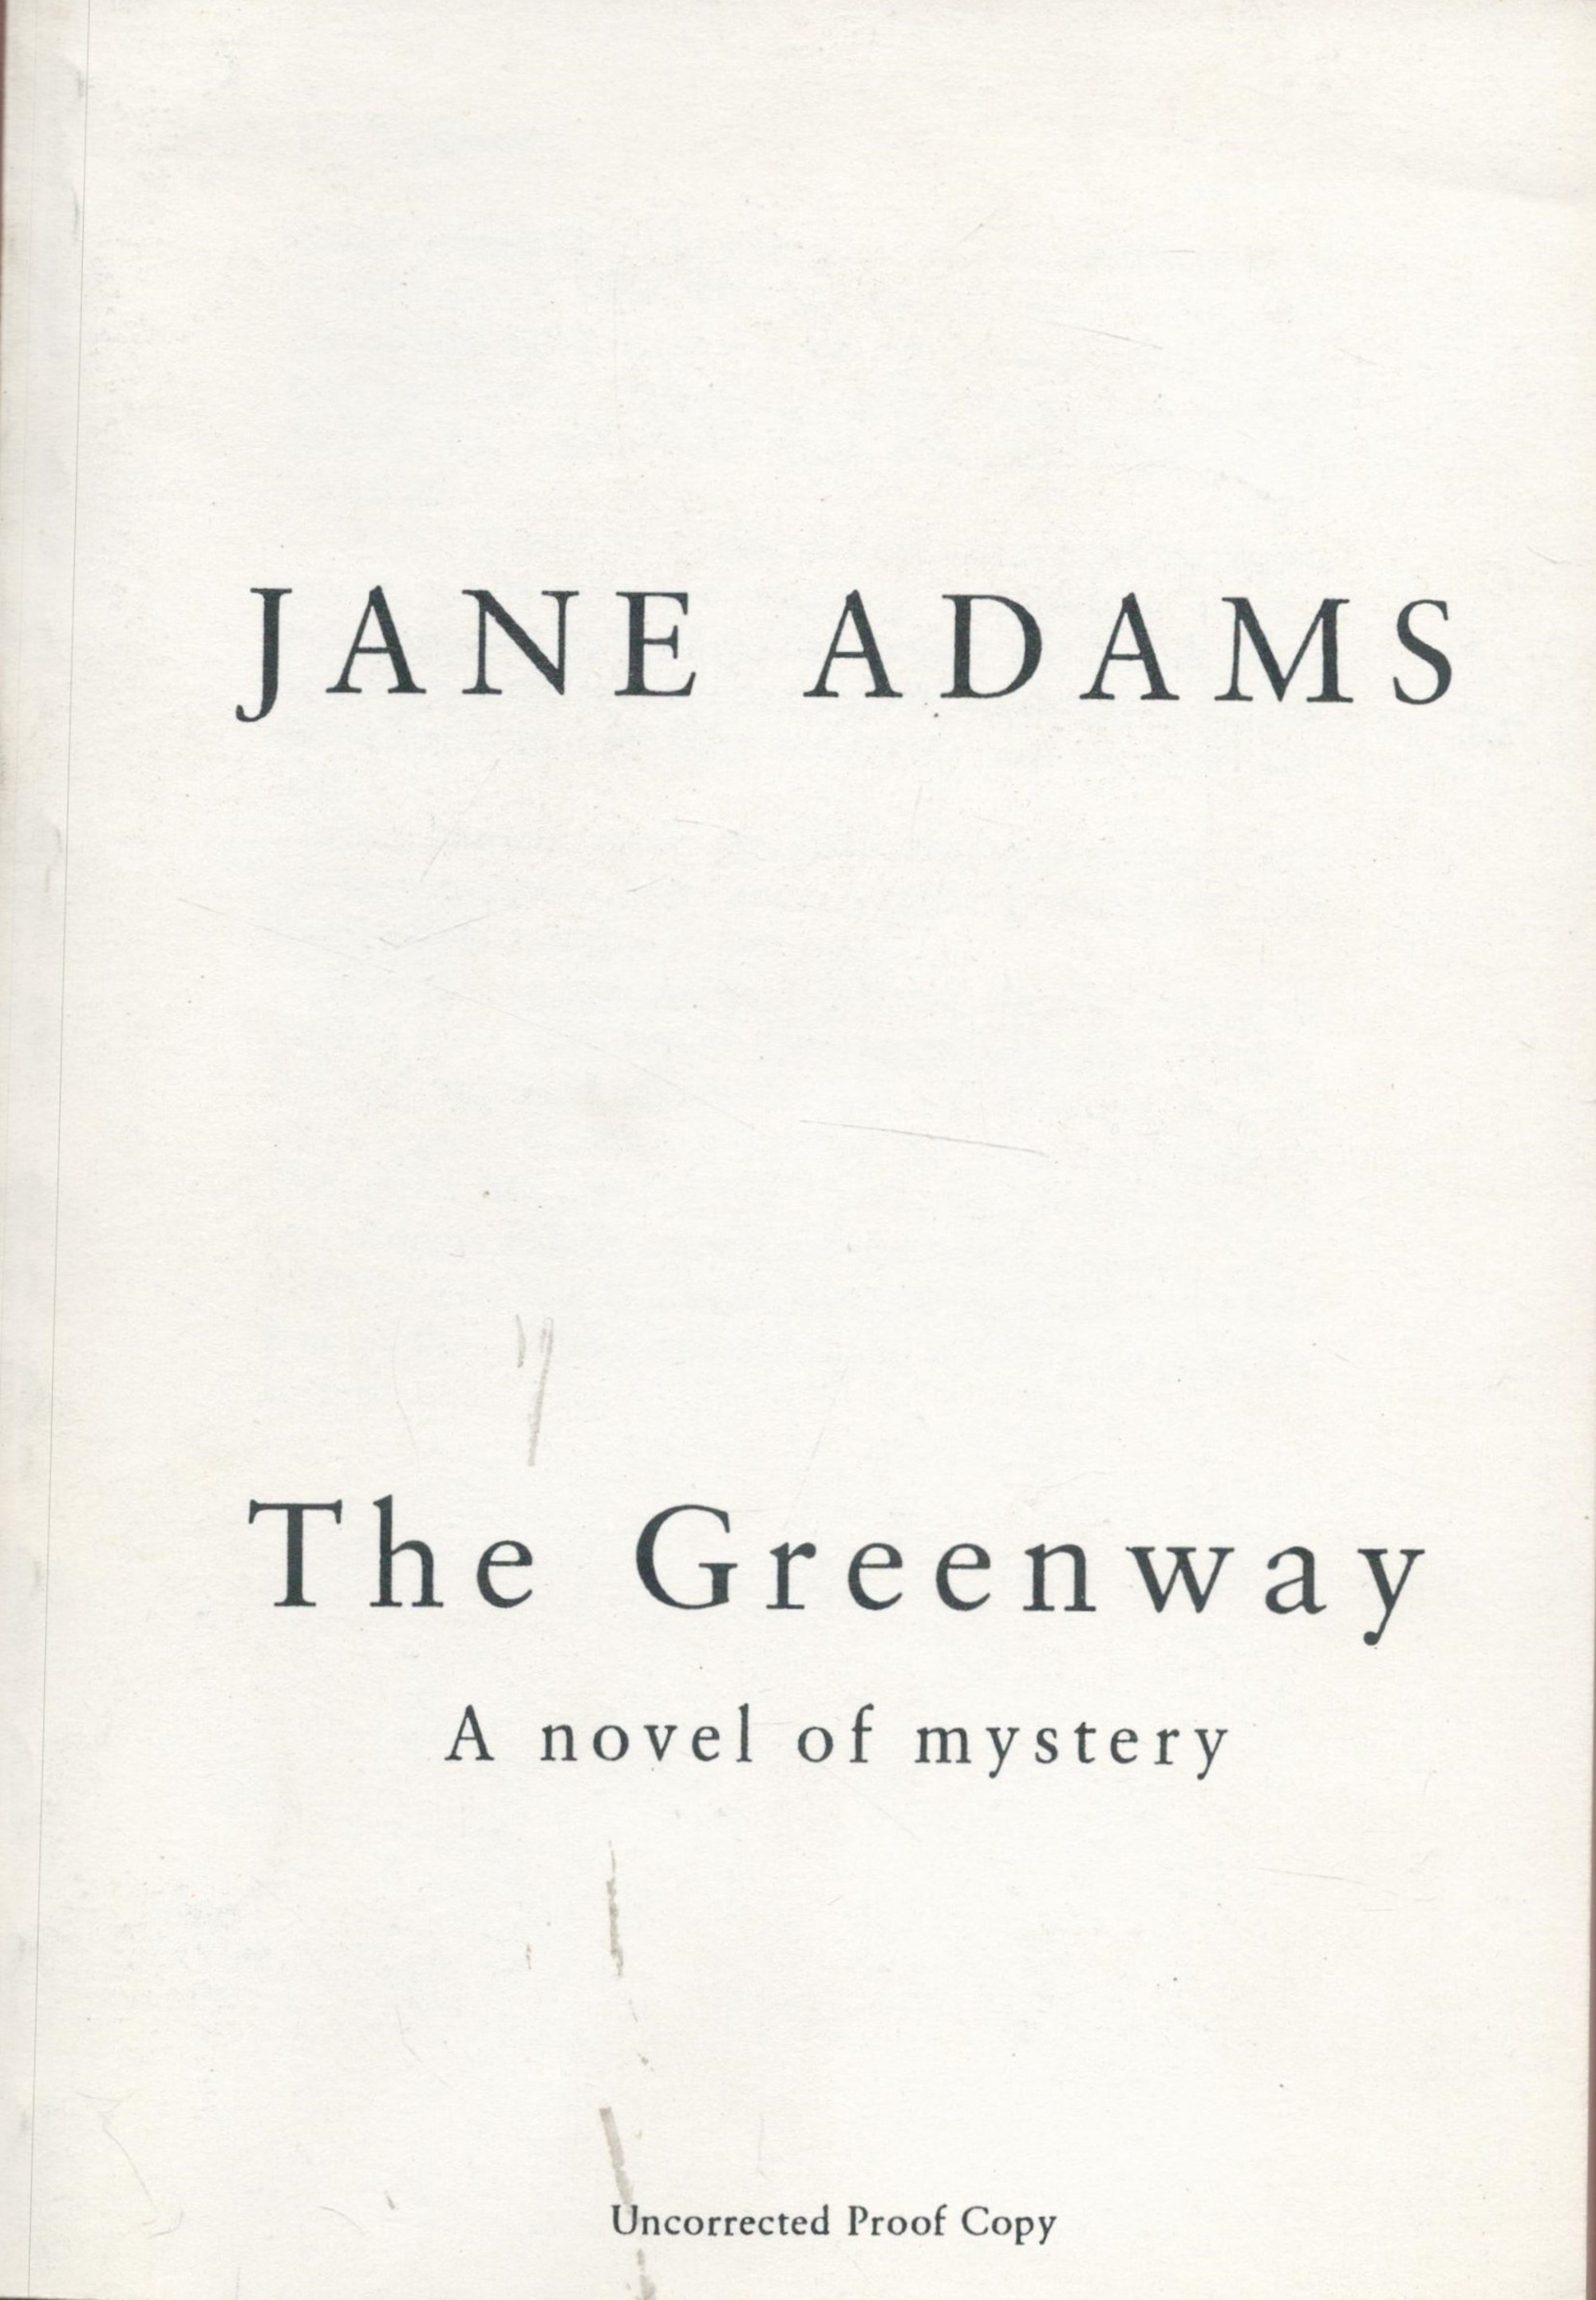 Jane Adams. The Greenway. Rare: Uncorrected Proof Copy 1995 Book. We combine shipping on all lots.